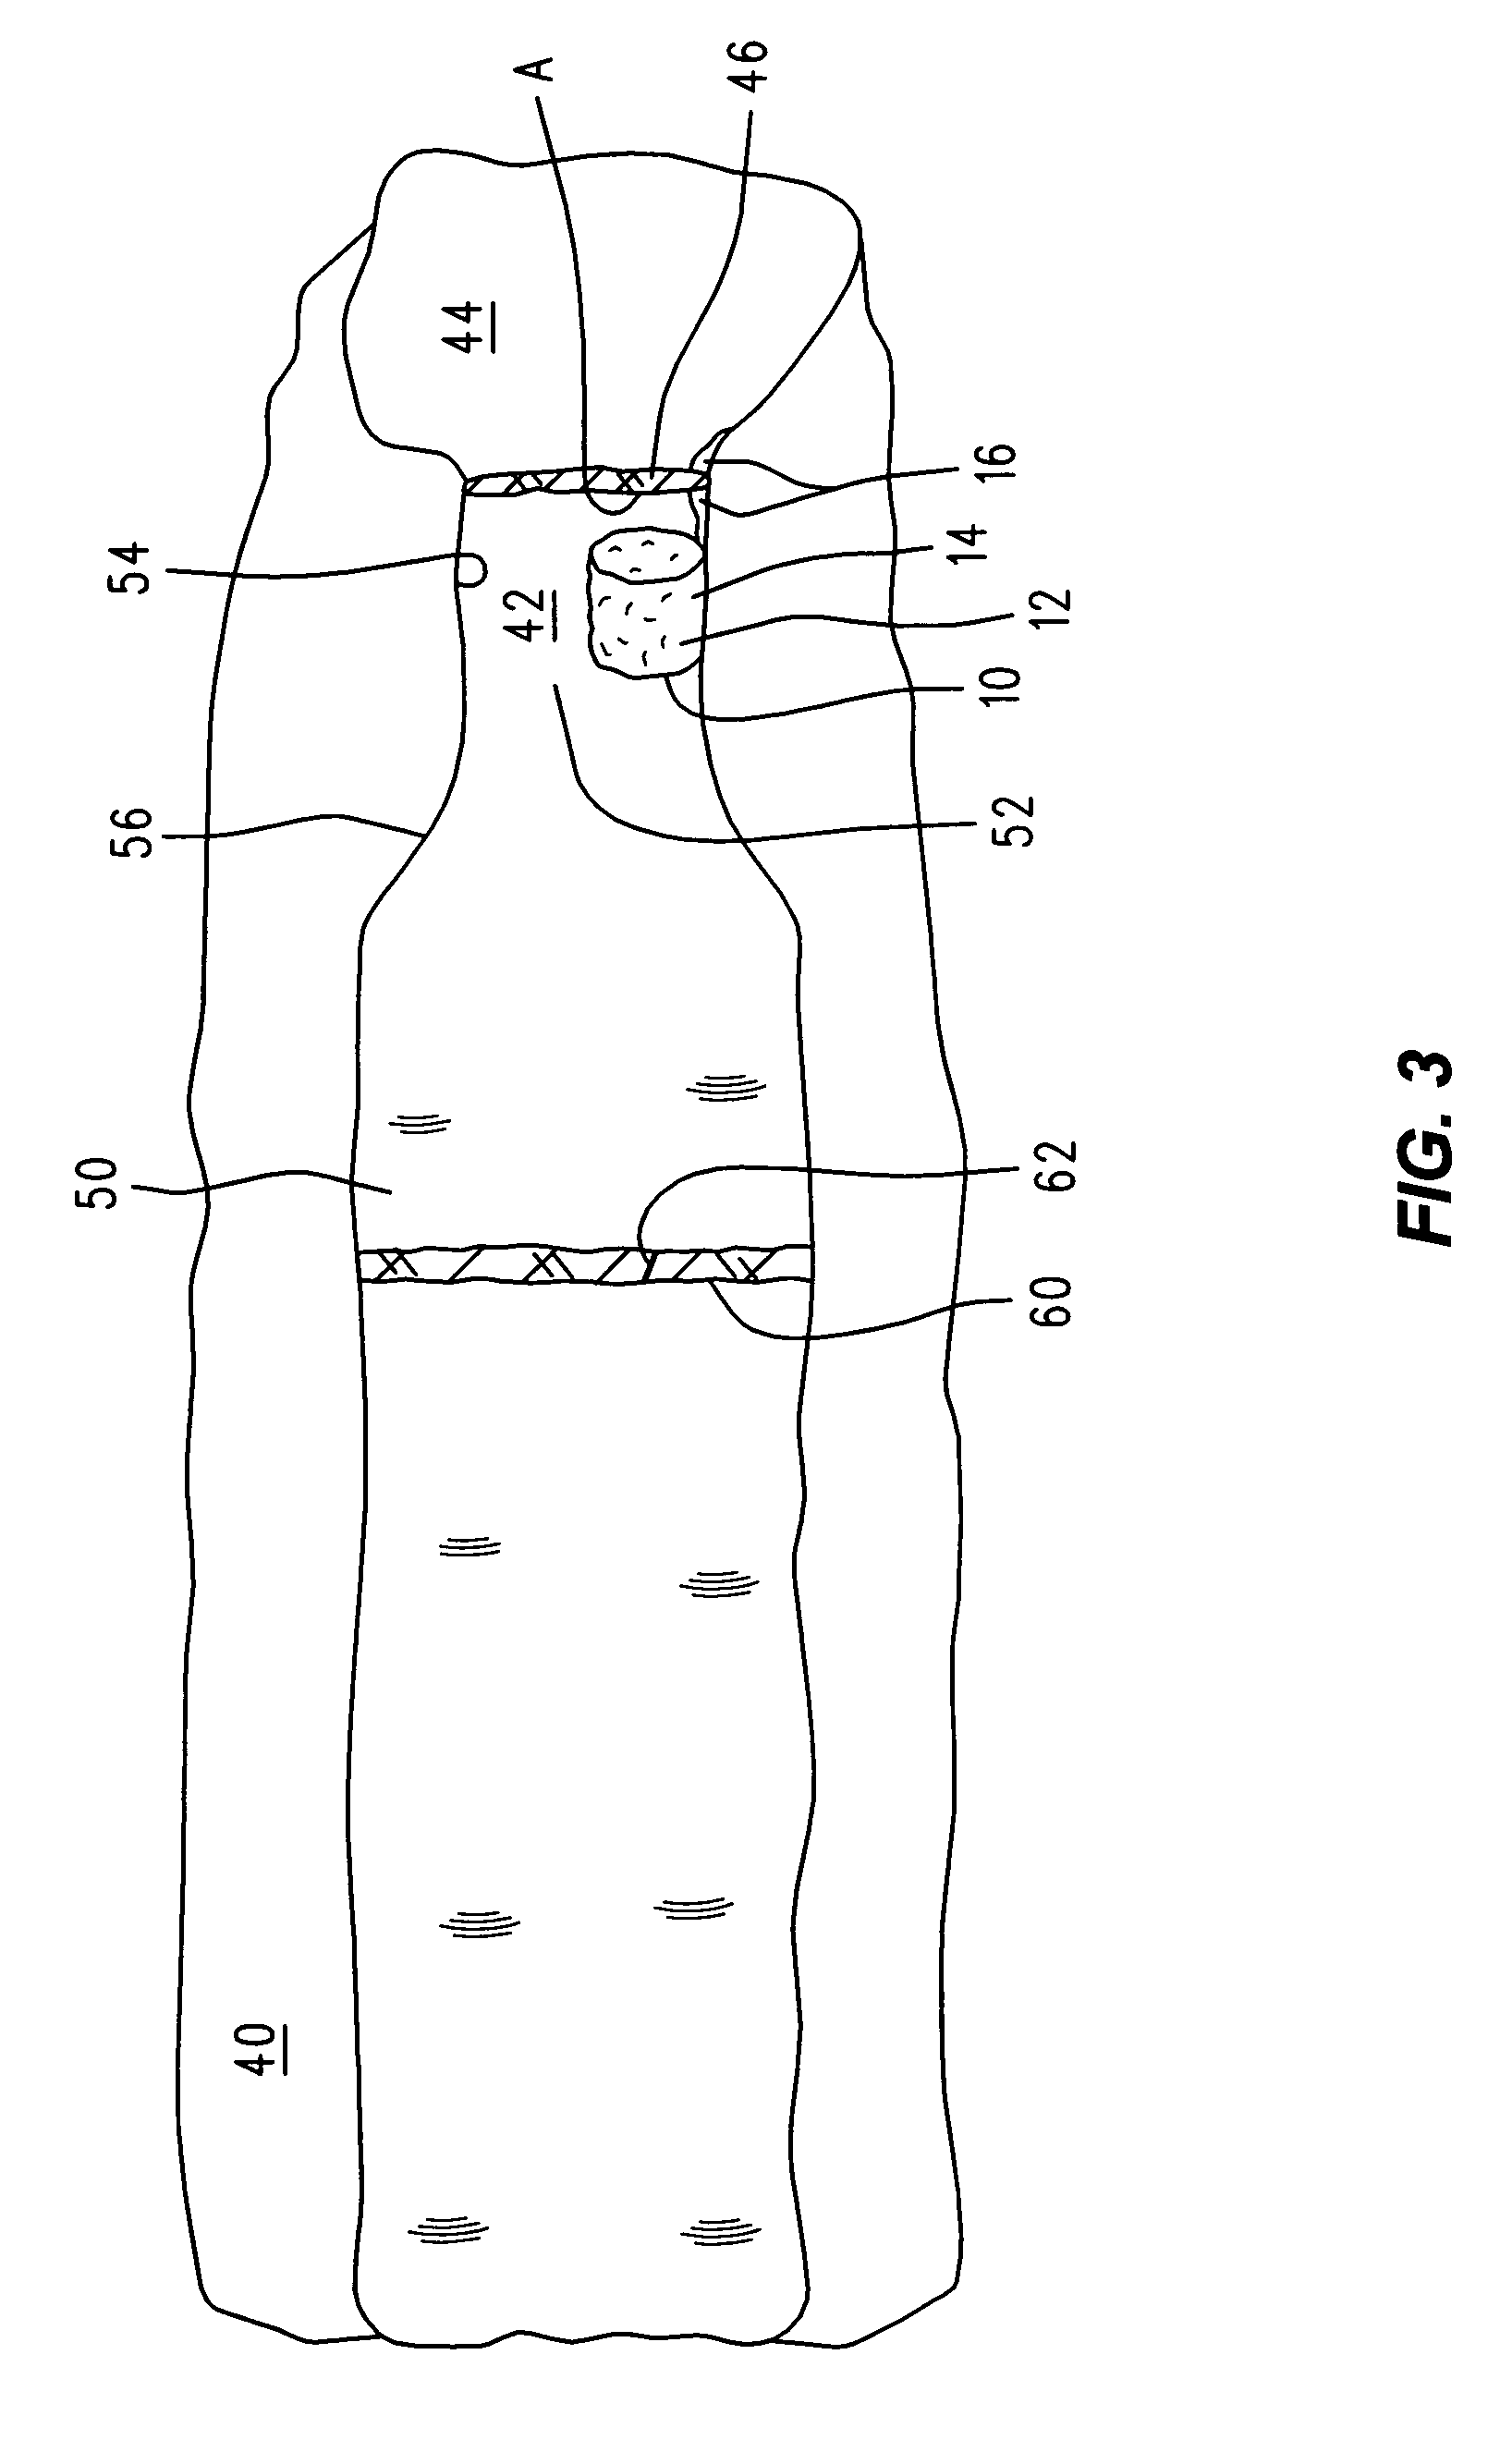 Controlled release system for delivering therapeutic agents into the inner ear